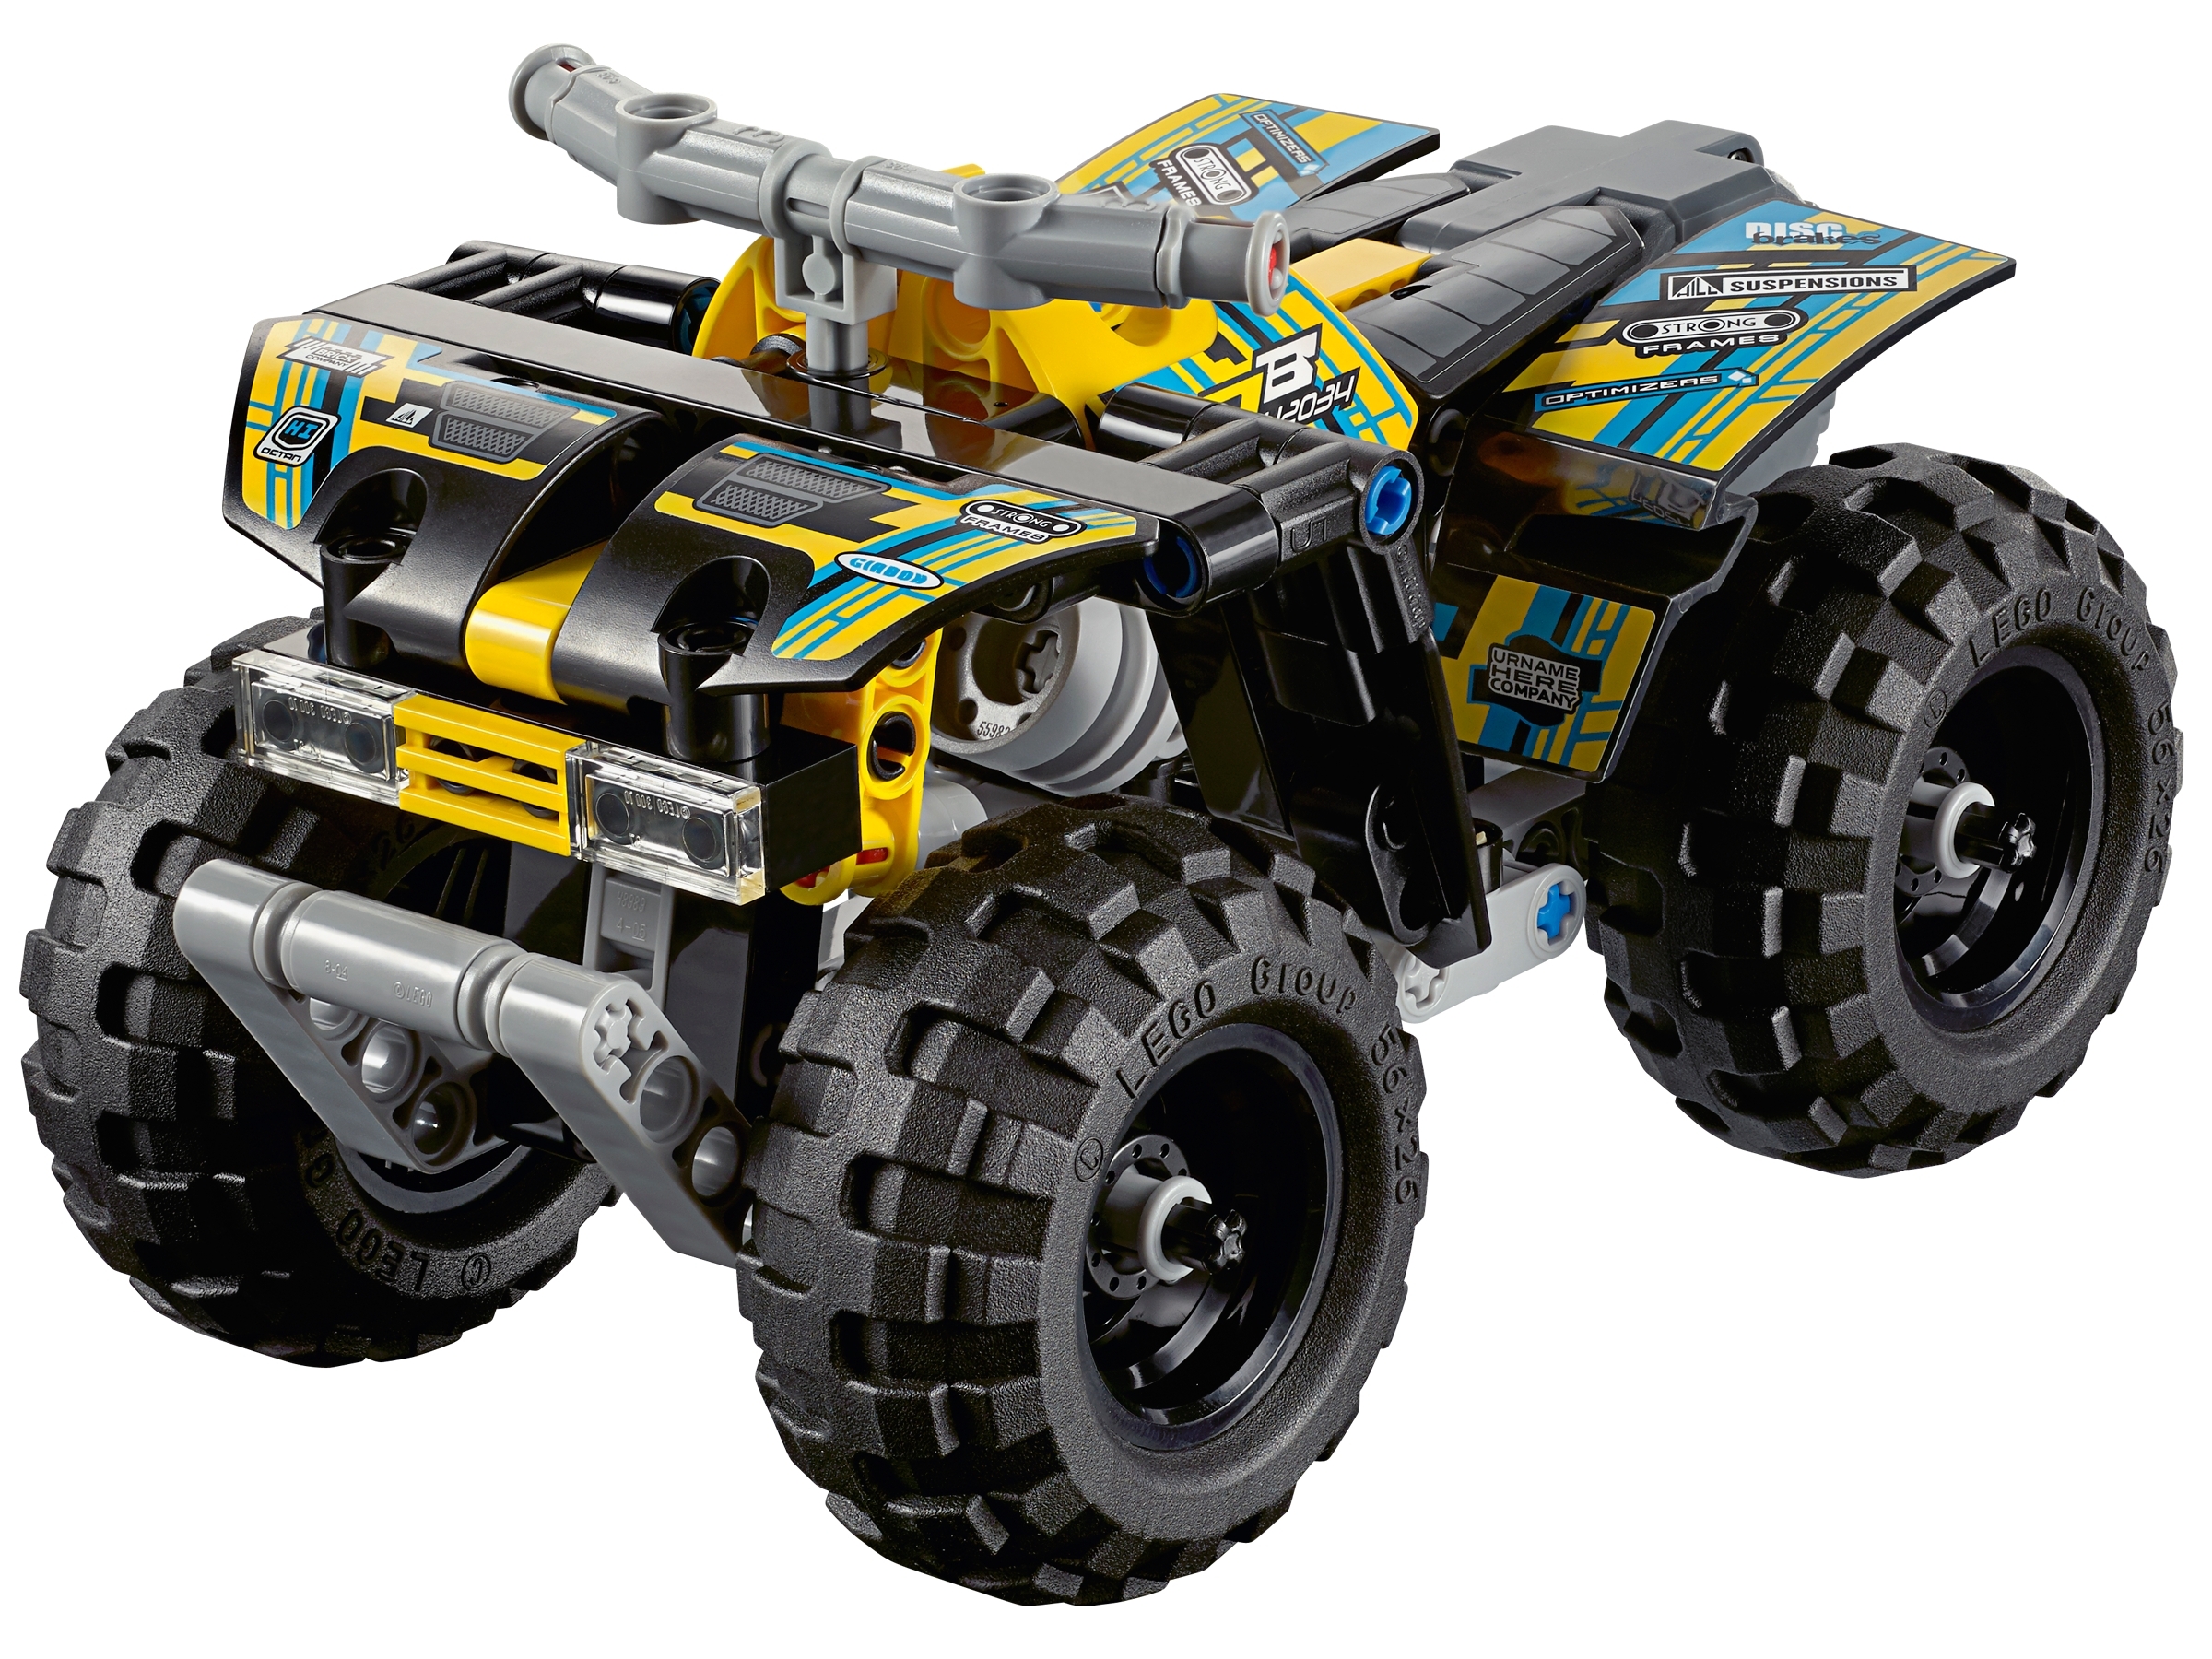 Quad Bike 42034 | Technic™ | Buy online at the Official LEGO® Shop US